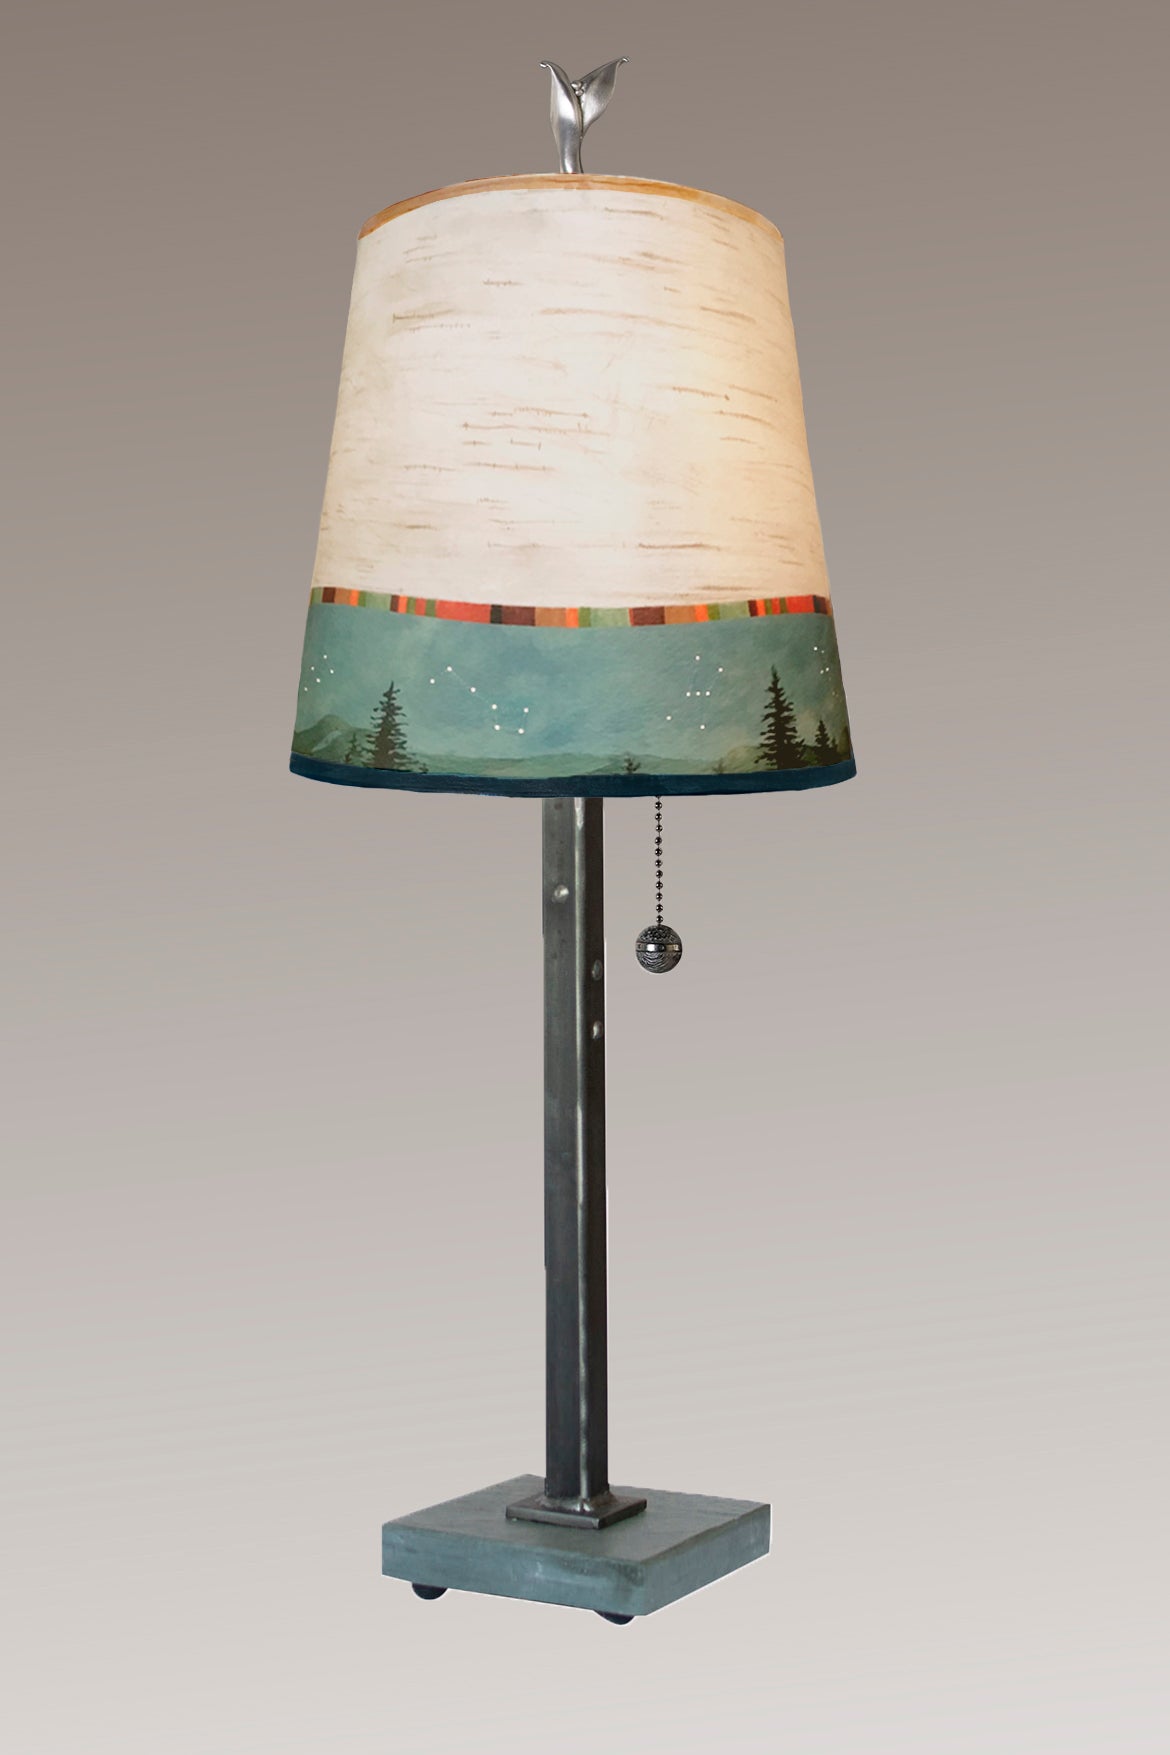 Steel Table Lamp with Small Drum Shade in Birch Midnight